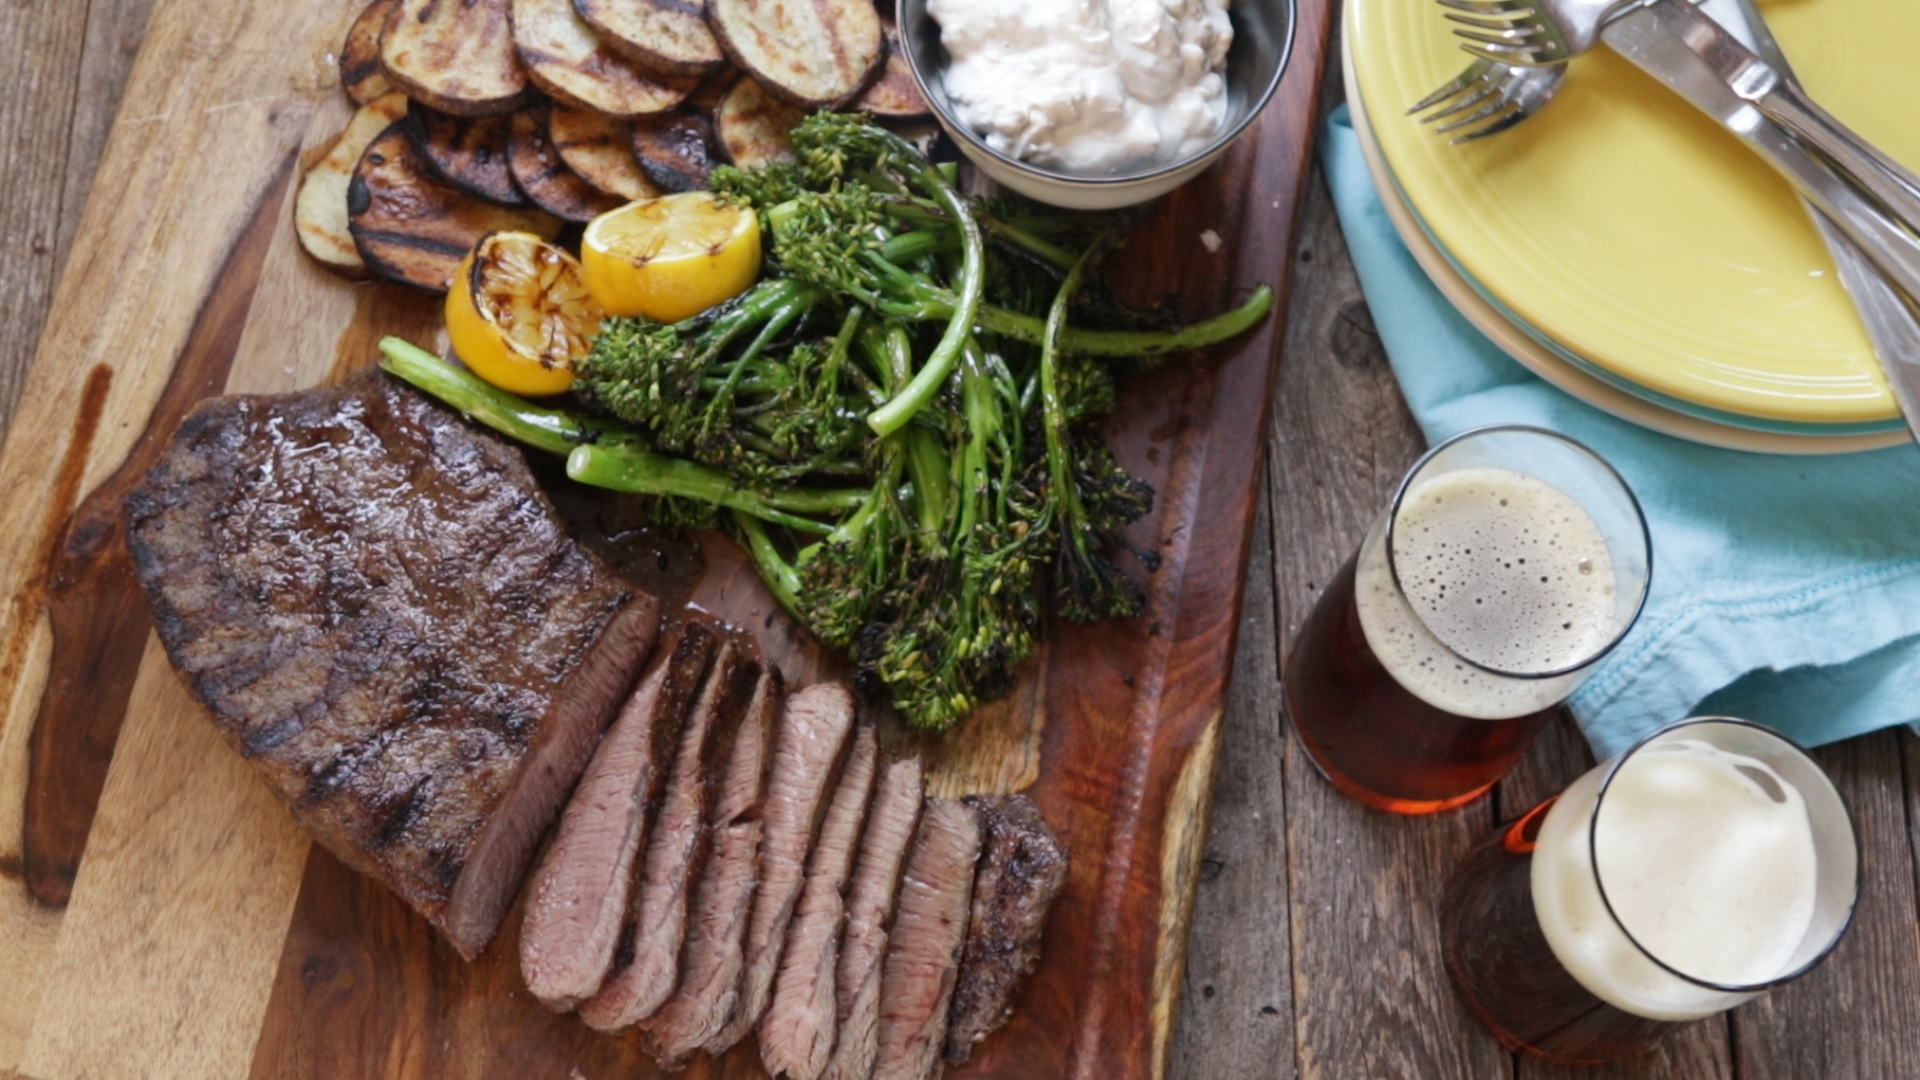 Grilled Steak with Blue Cheese, Potatoes, and Broccolini